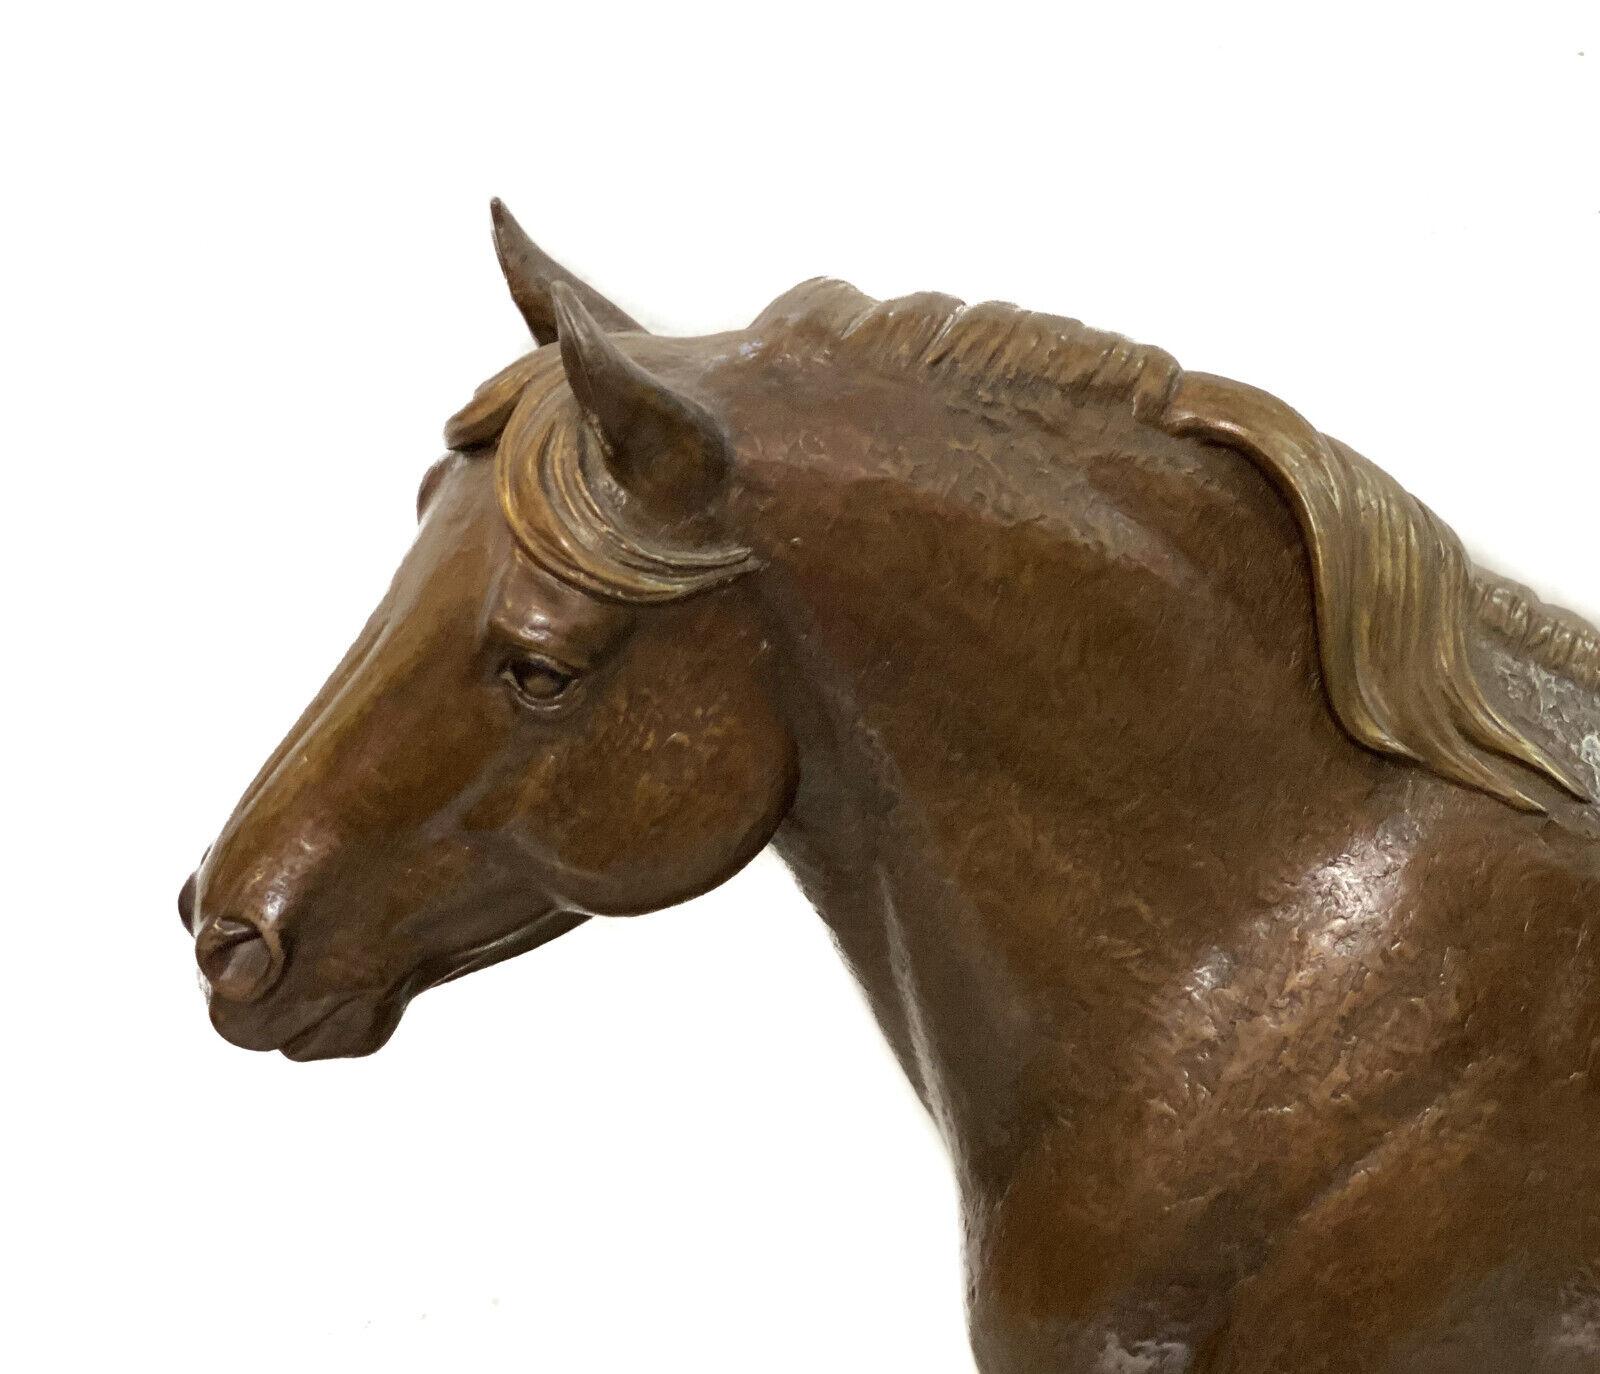 Marilyn Newmark Bronze Horse Sculpture, Herculean Limited Edition of 5, 1994

The sculpture depicts a realistically modeled trotting Stallion, with textured skin and even patina, sitting atop a wooden base. Applied award plaques include: AAA 1993